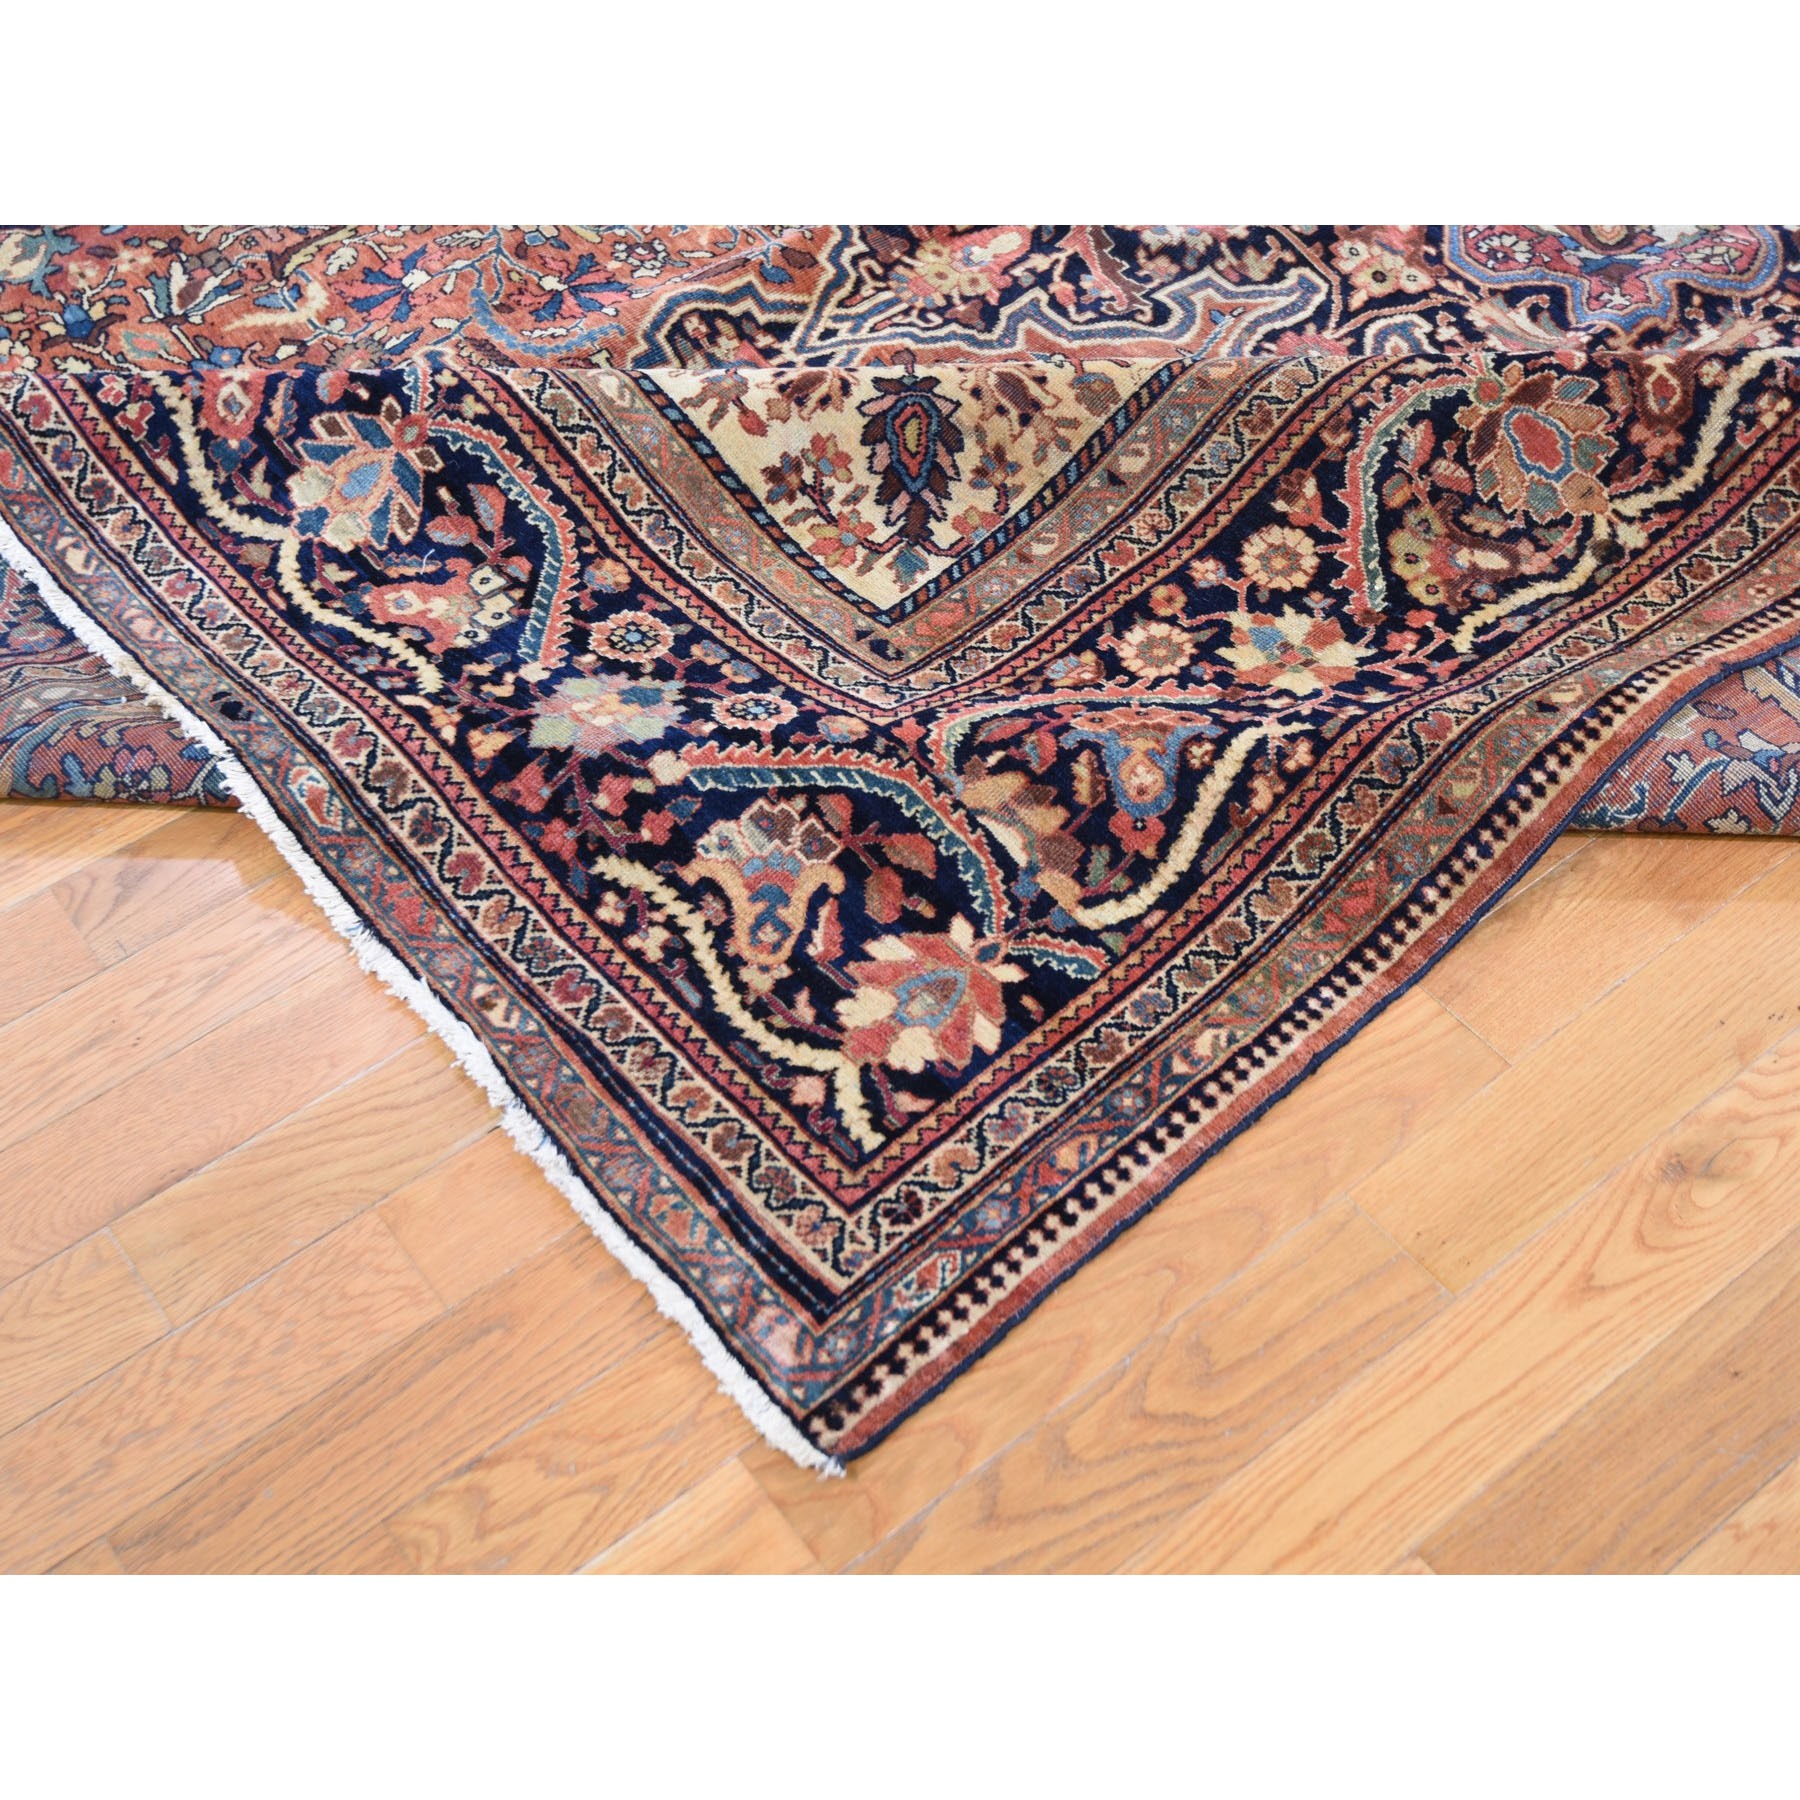 8-9 x12-6  Red Antique Persian Sarouk Fereghan  Evern Wear, Soft Hand Knotted Oriental Rug 